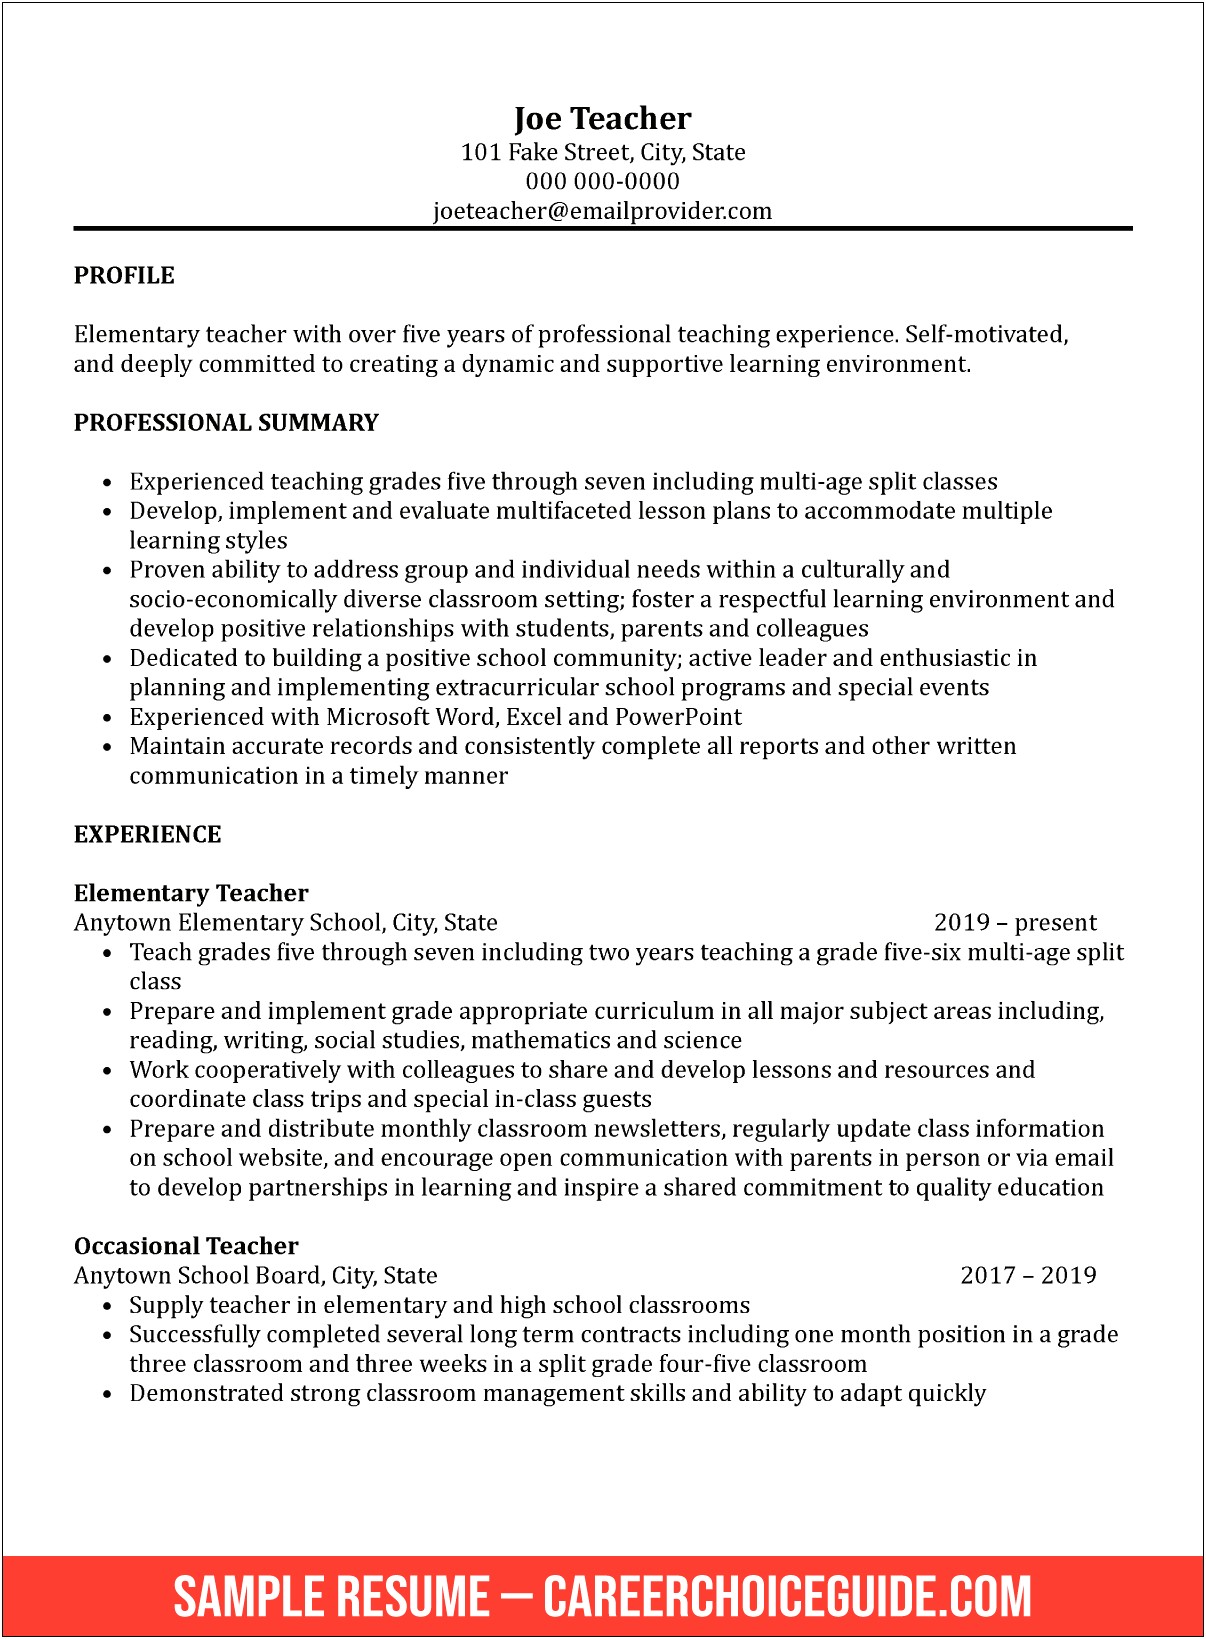 Sample One Year Experience Resume